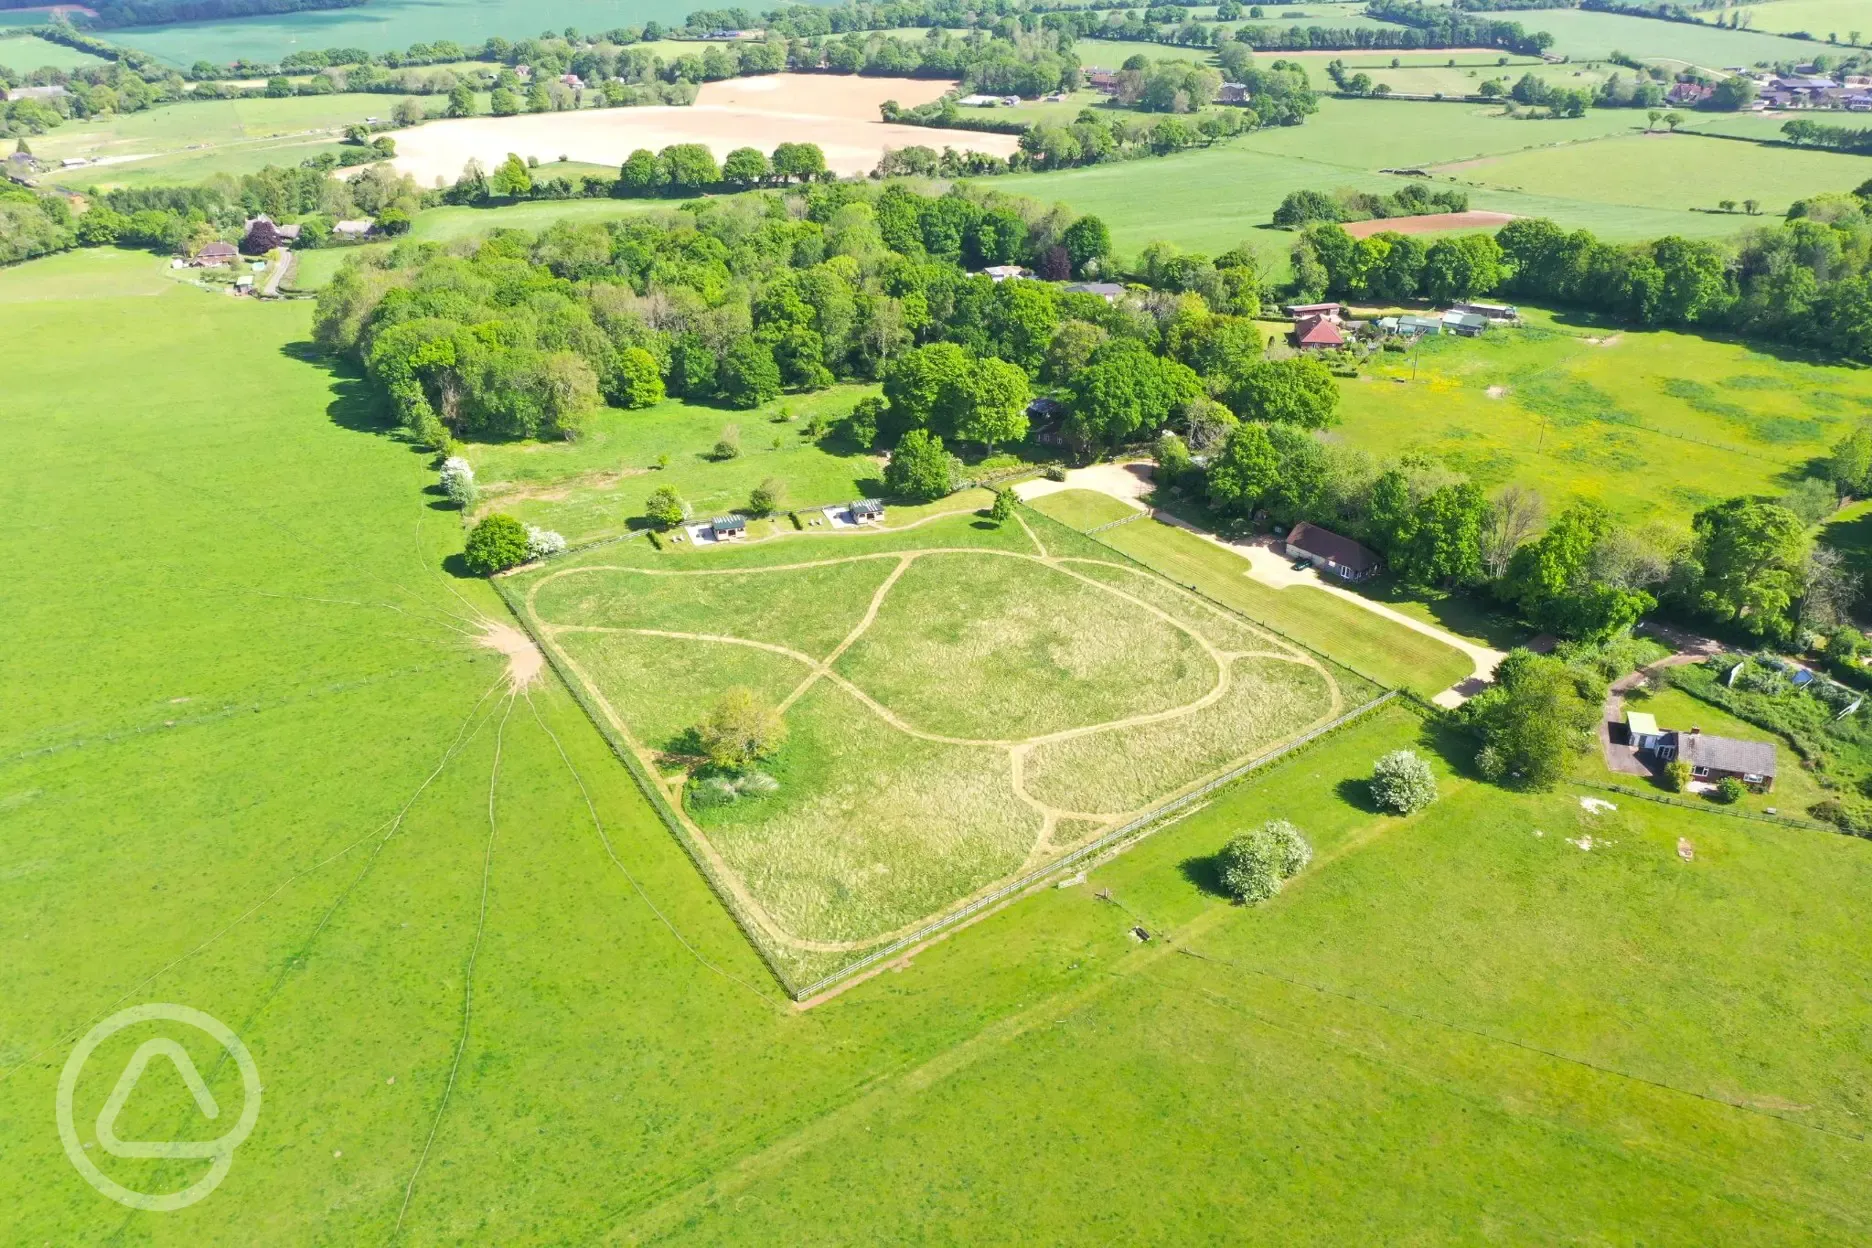 Aerial of the site and surrounding countryside